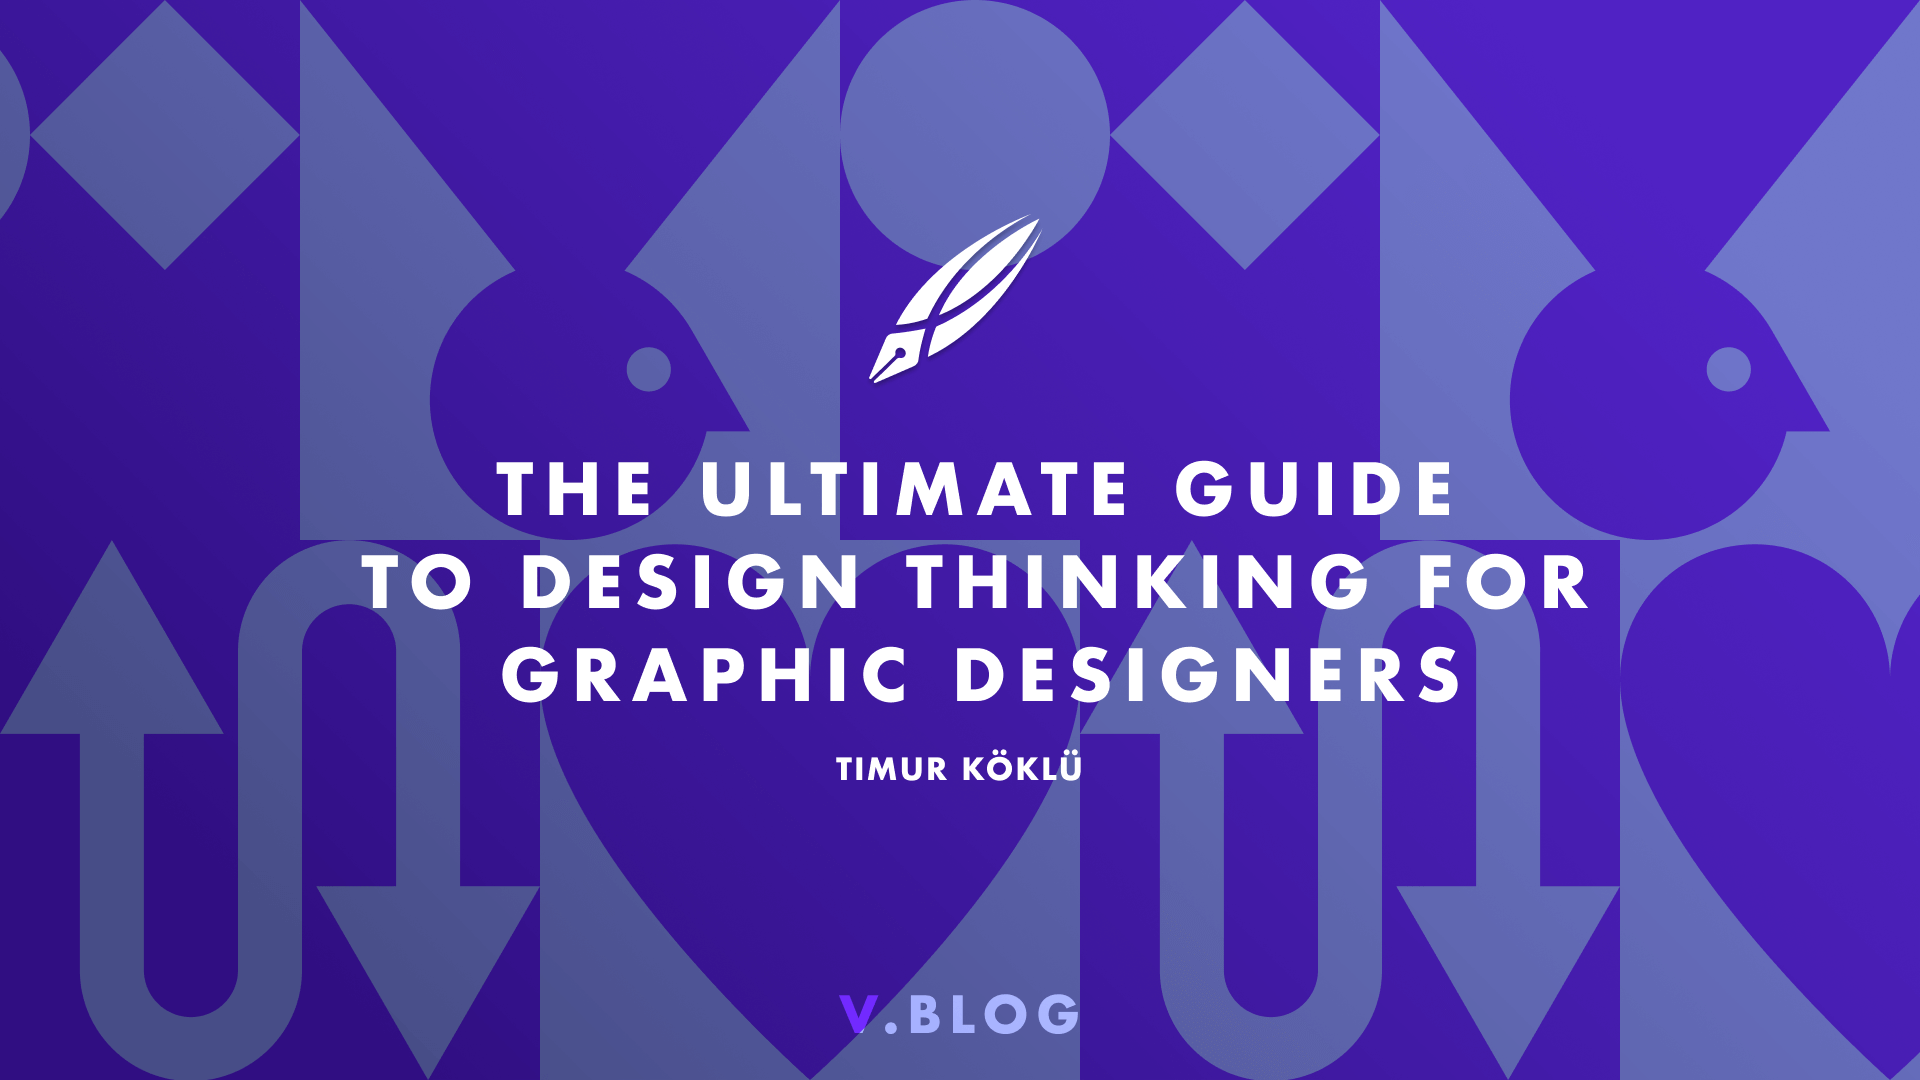 The ultimate guide to design thinking for graphic designers | Linearity